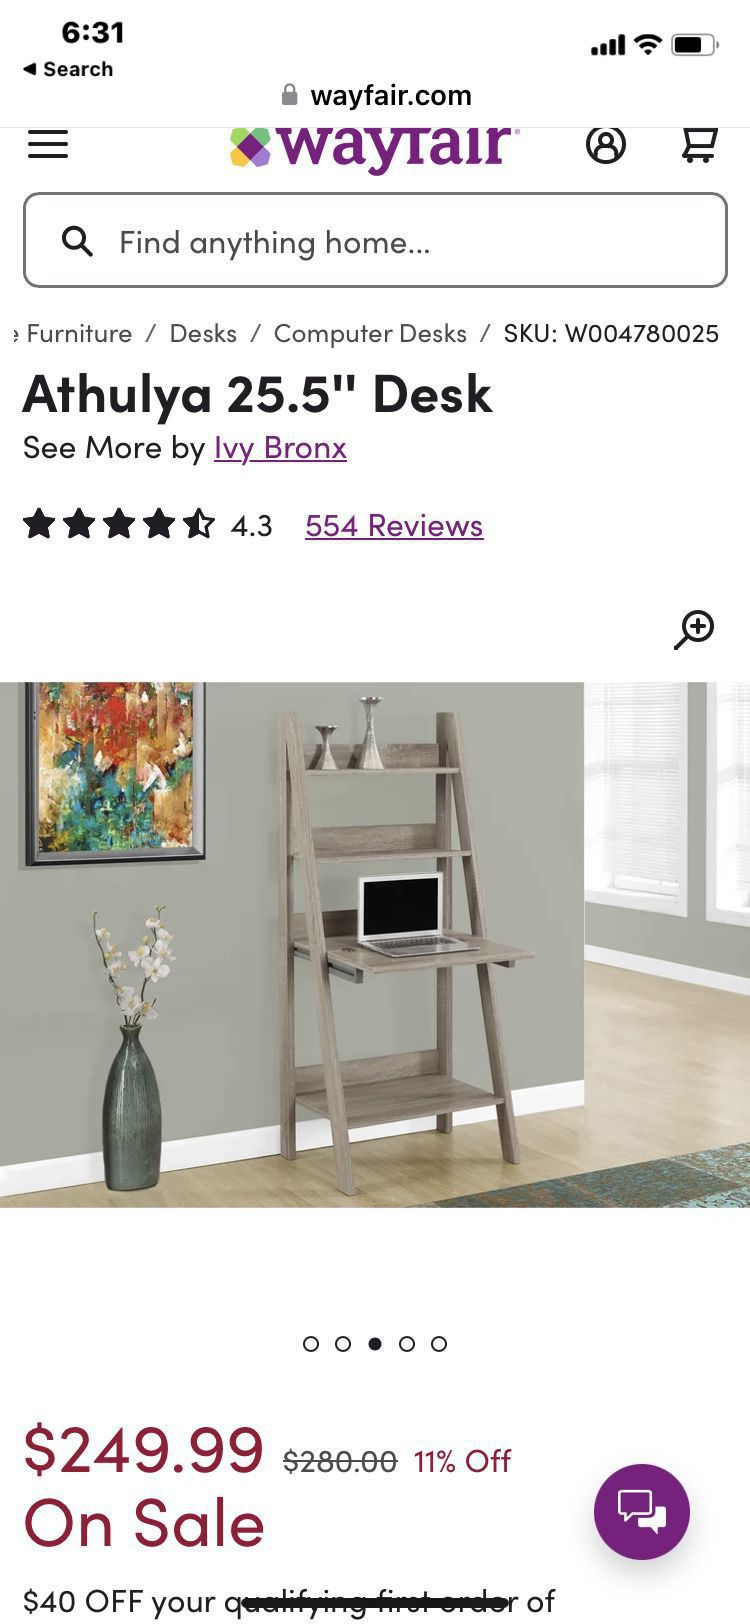 Ladder Desk / Bookshelf - great for small spaces!